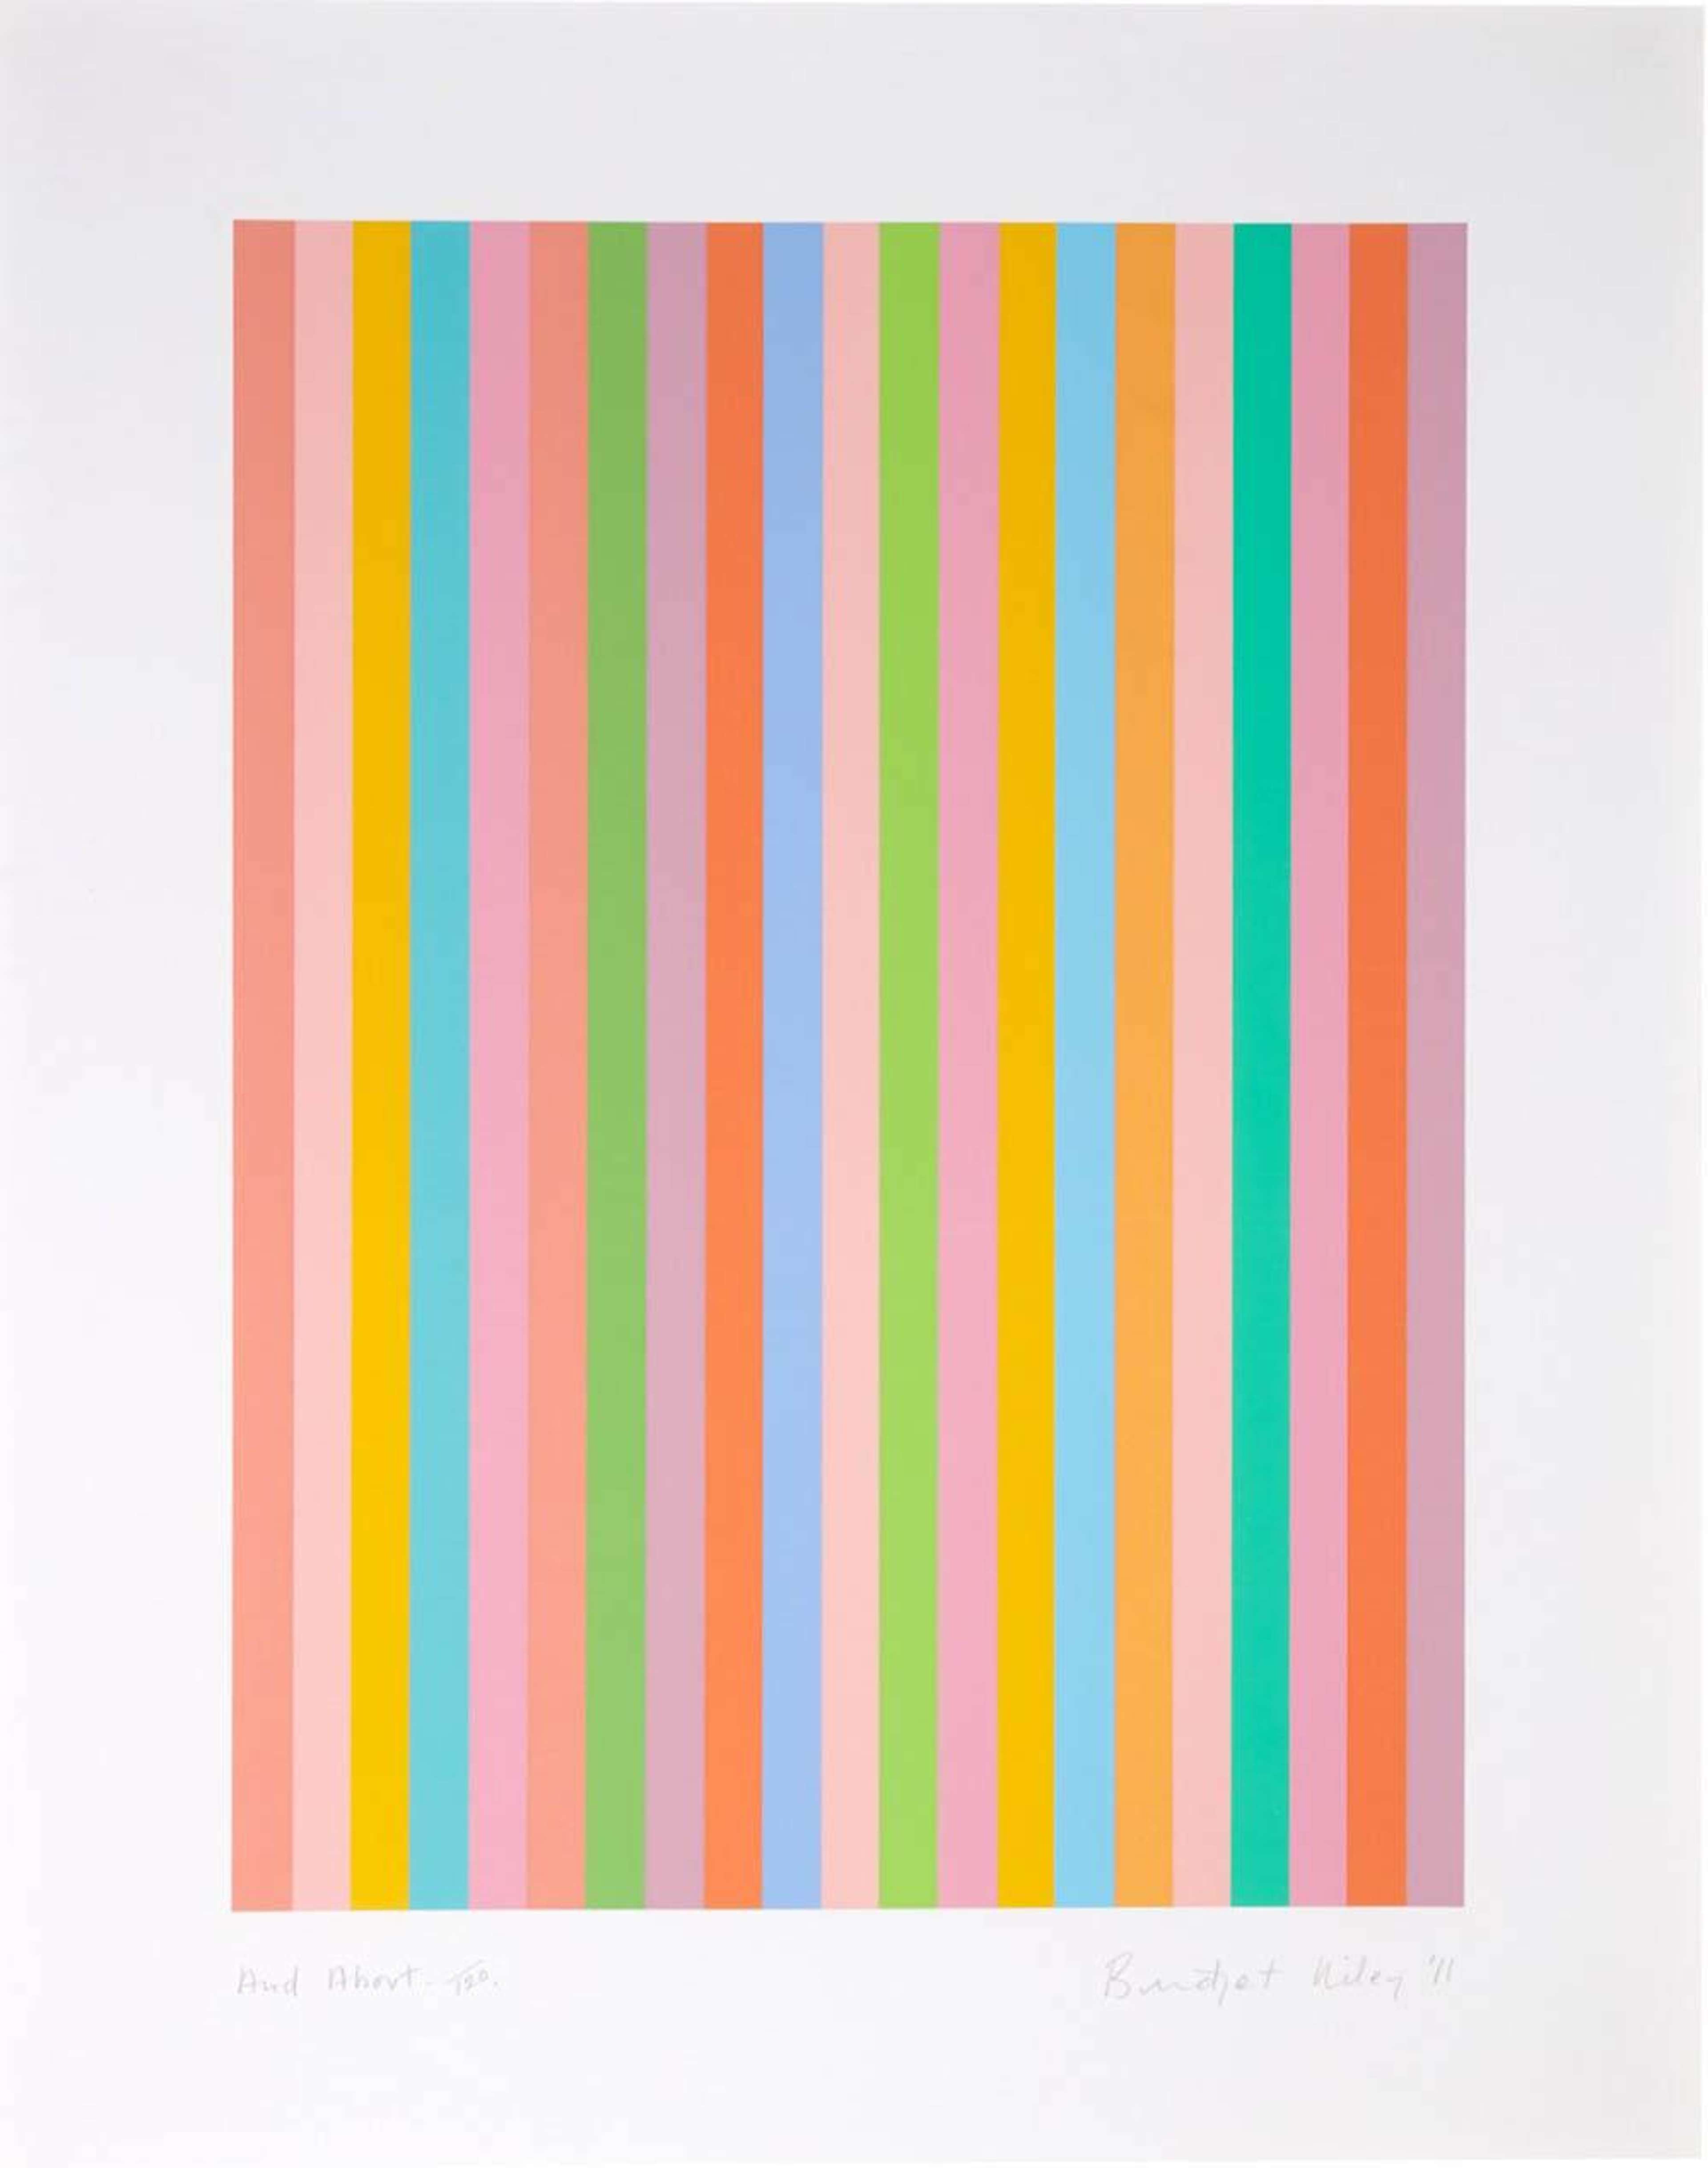 Bridget Riley’s And About. An optical illusion screenprint of multicoloured stripes against a white background. 